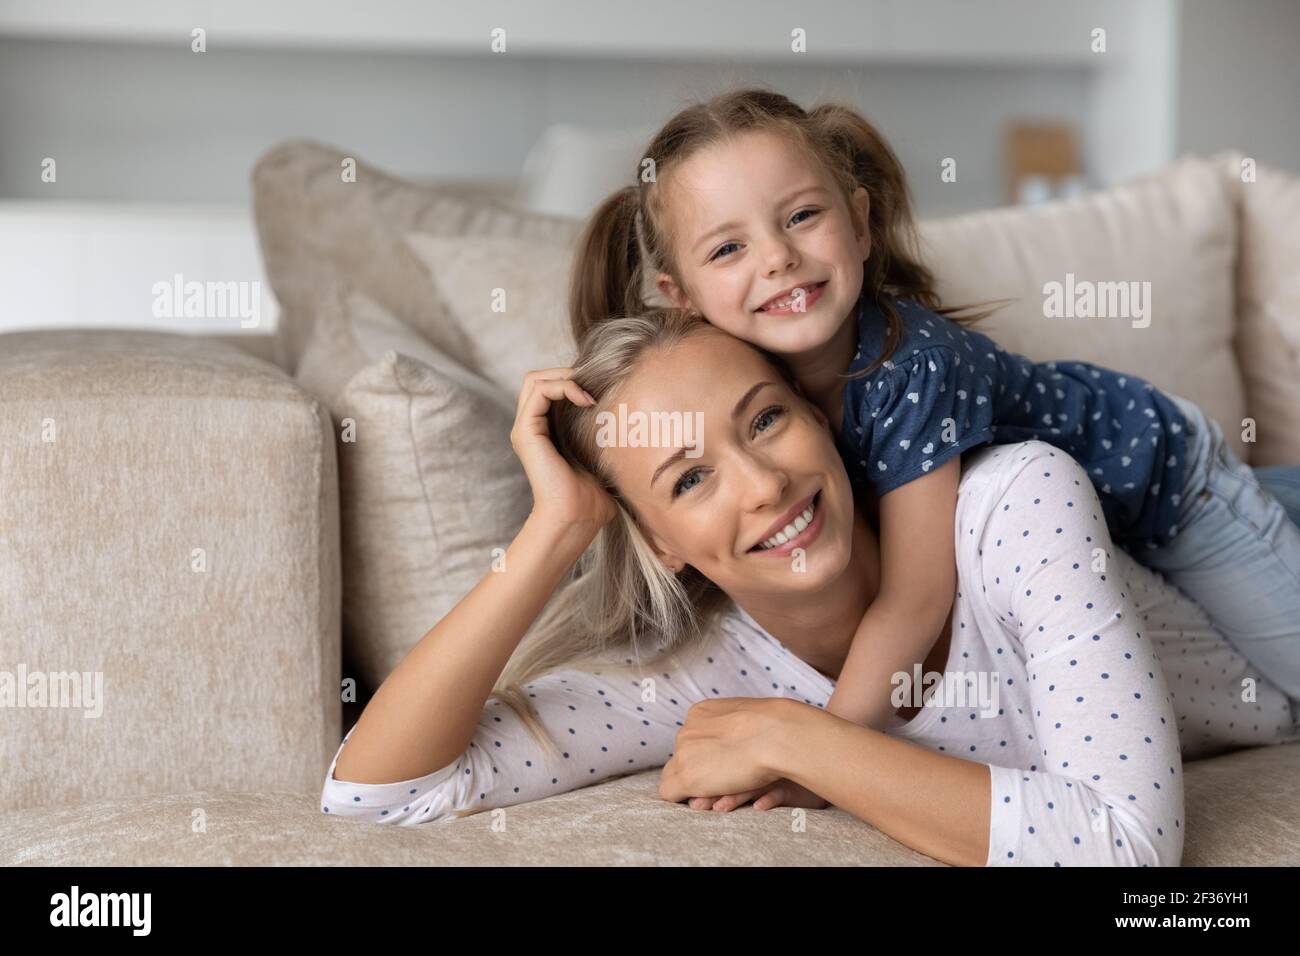 Portrait of smiling young mom and little daughter relaxing Stock Photo